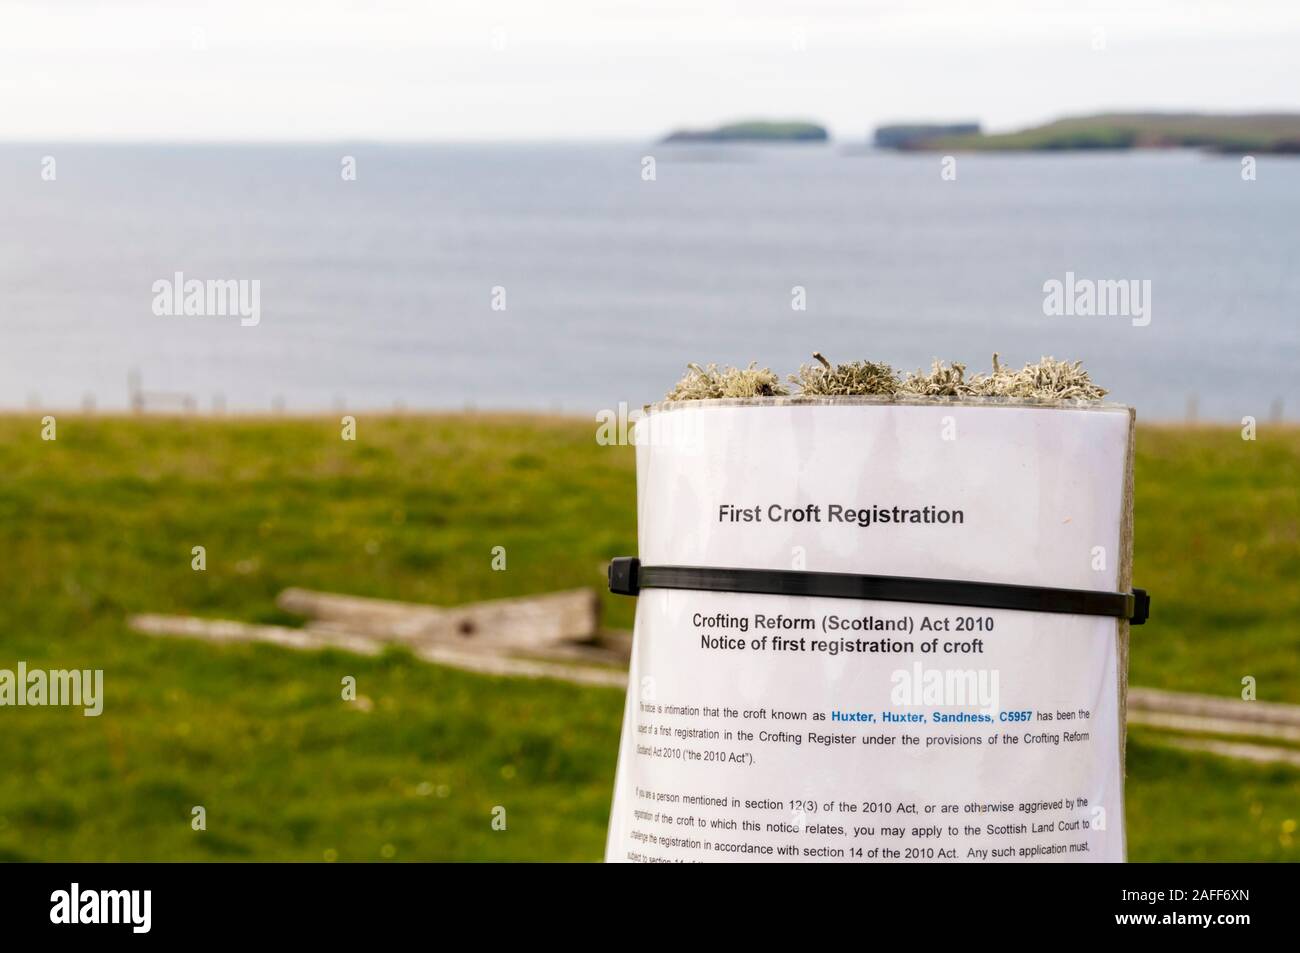 A Notice of first registration of a croft under the Crofting Reform (Scotland) Act 2010.  On land in Mainland Shetland. Stock Photo